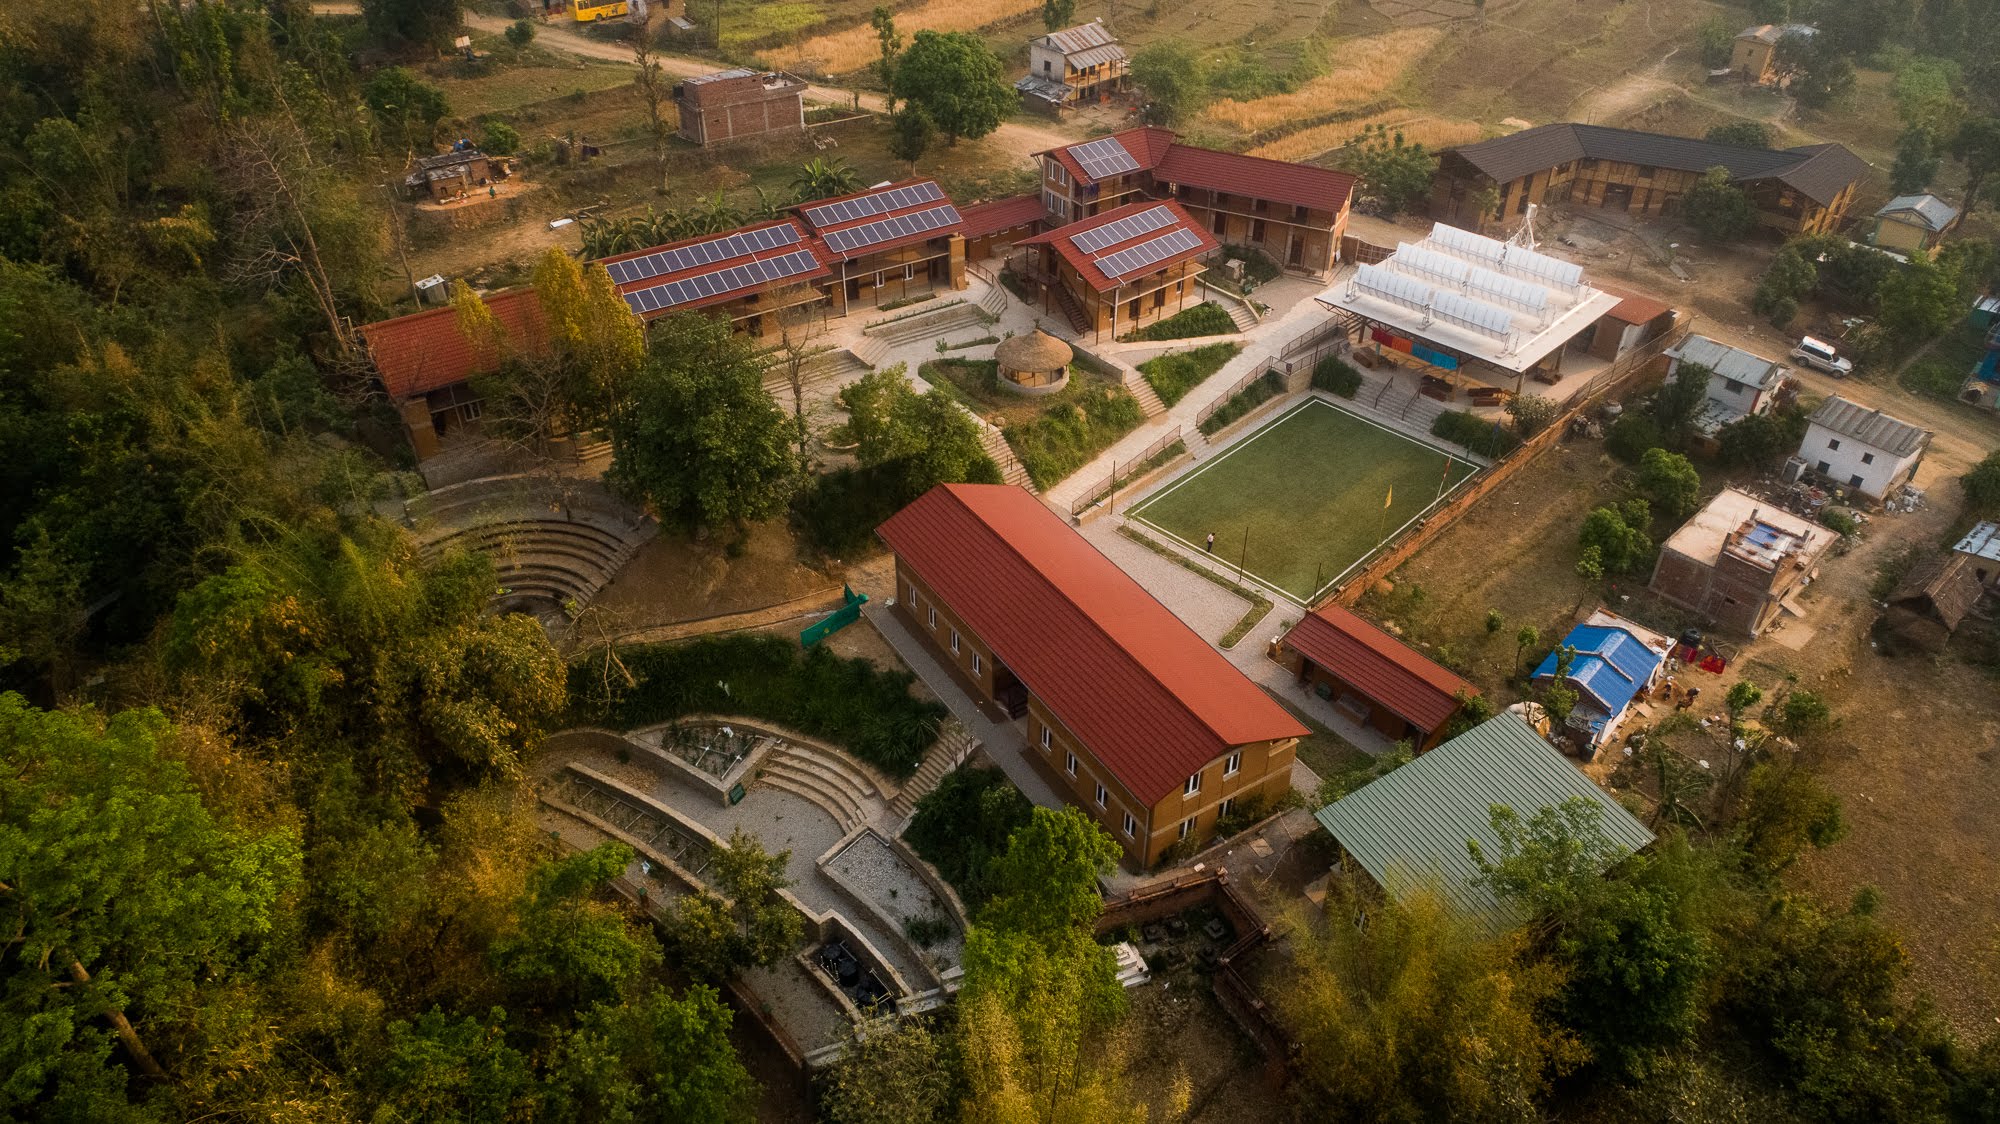 Launching Future Climate Leaders at the Greenest School in Nepal